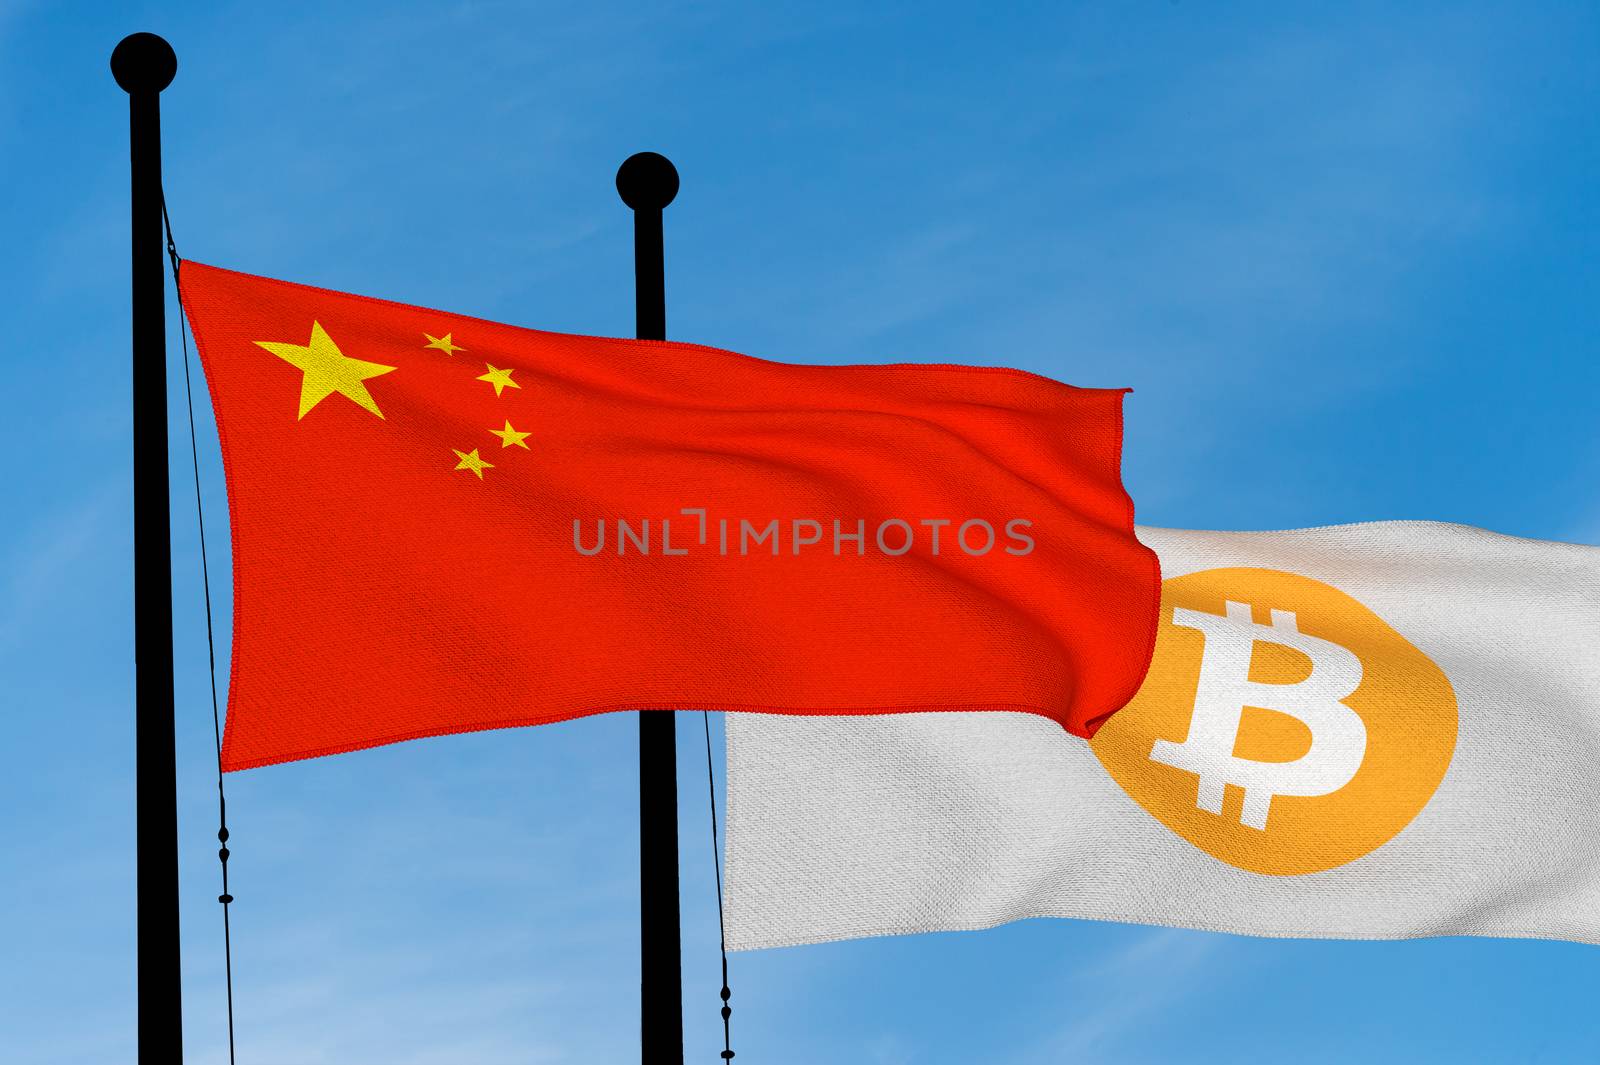 China flag and Bitcoin Flag waving over blue sky (digitally gene by mbruxelle